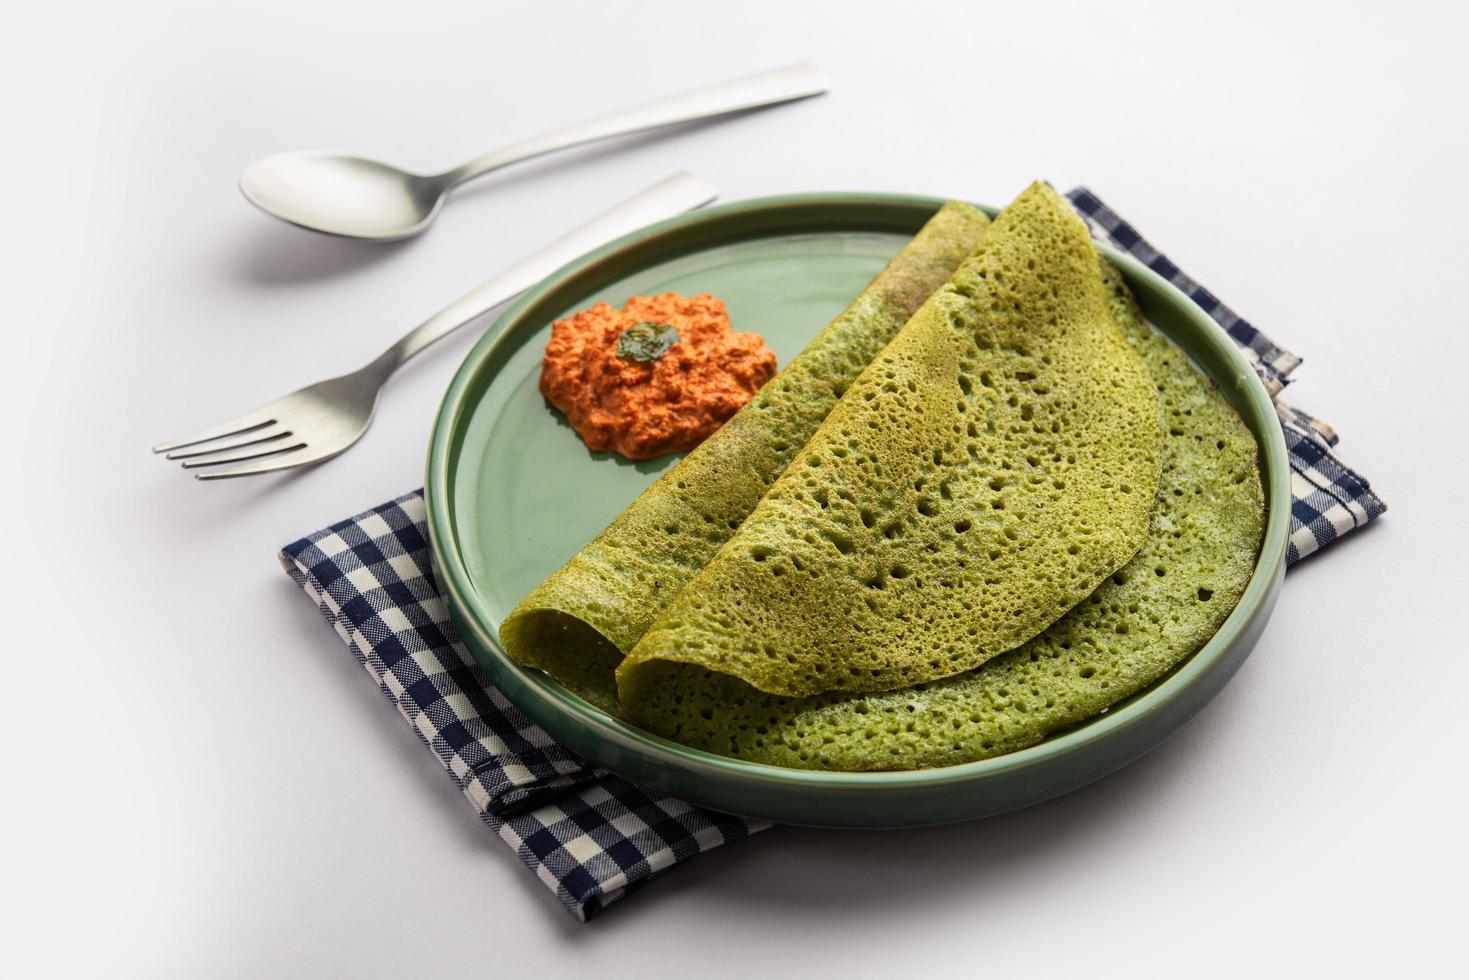 Palak dosa made using mixing spinach or keerai in batter, served with red chutney photo